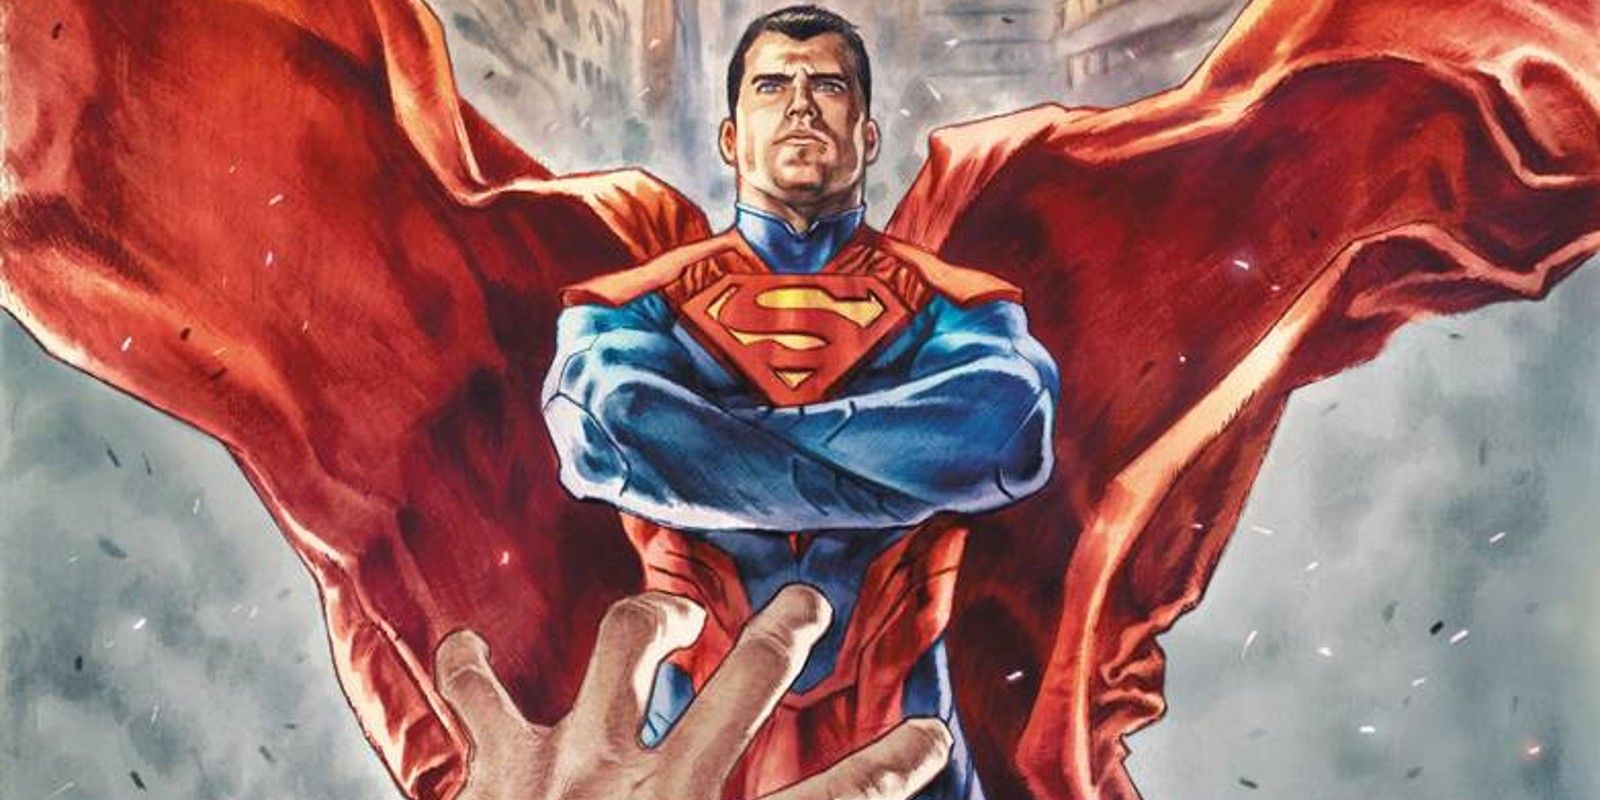 Injustice Superman with Arms Crossed